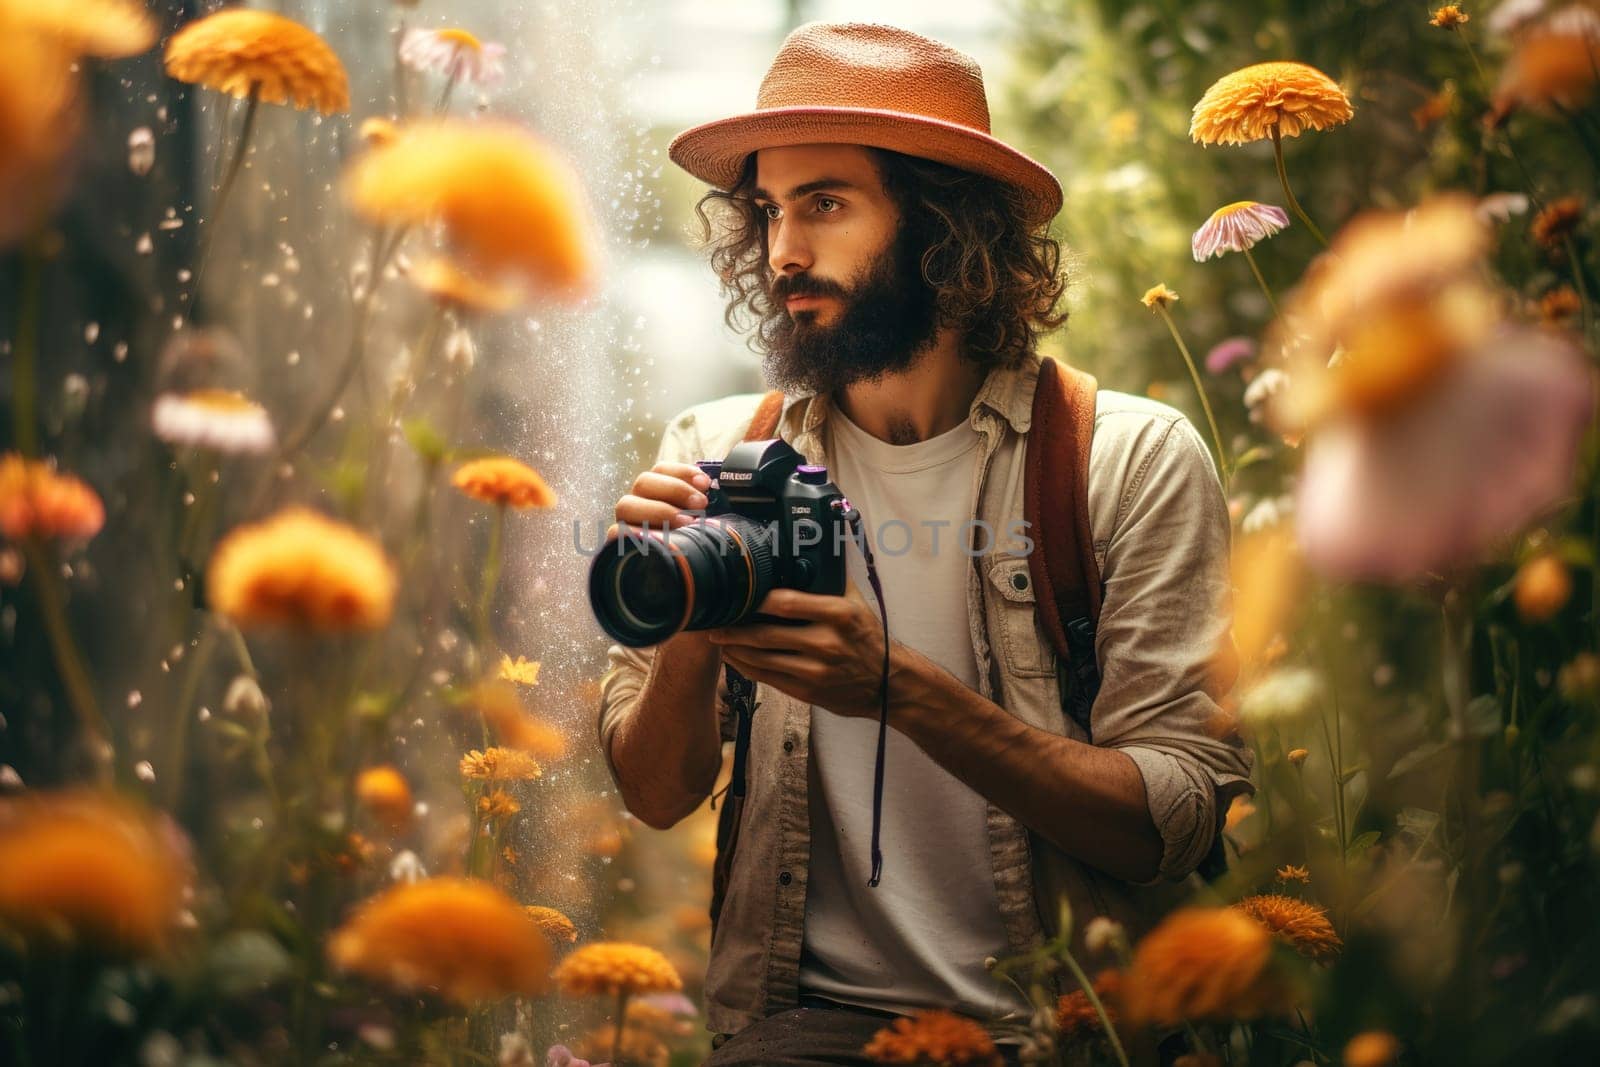 A man with a beard photographs flowers with a camera in the forest. High quality photo